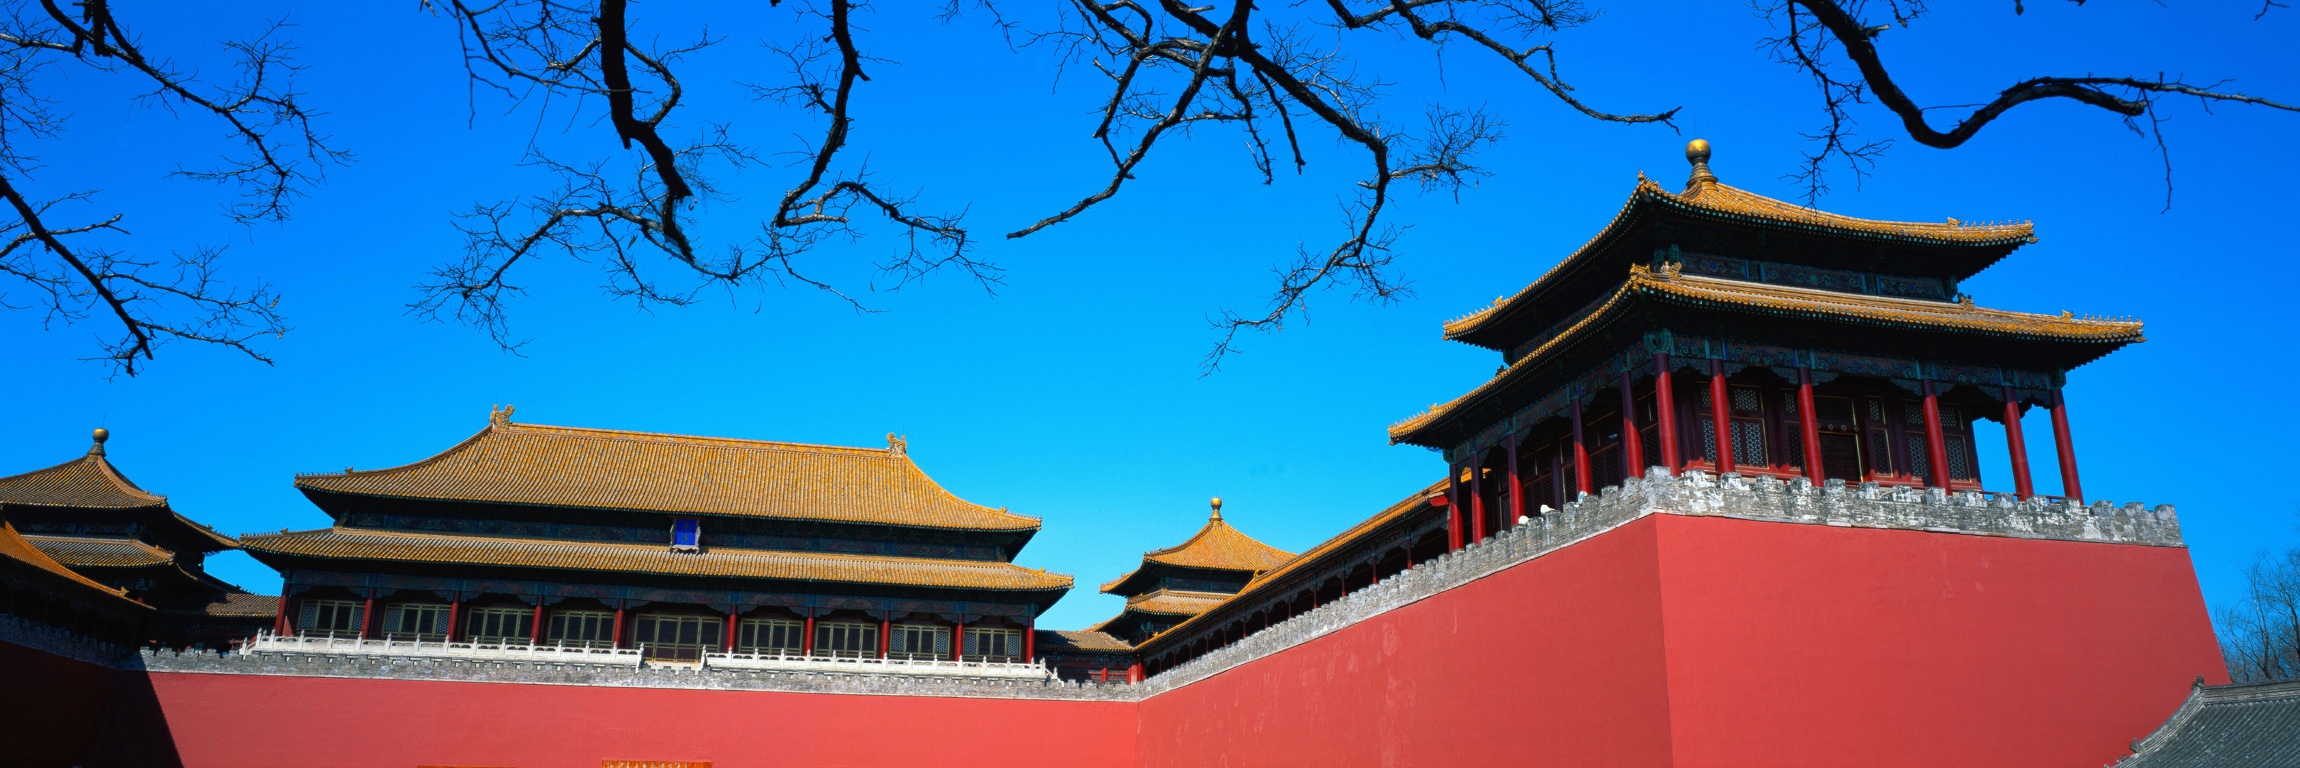 China Beijing Imperial Palace Wallpaper